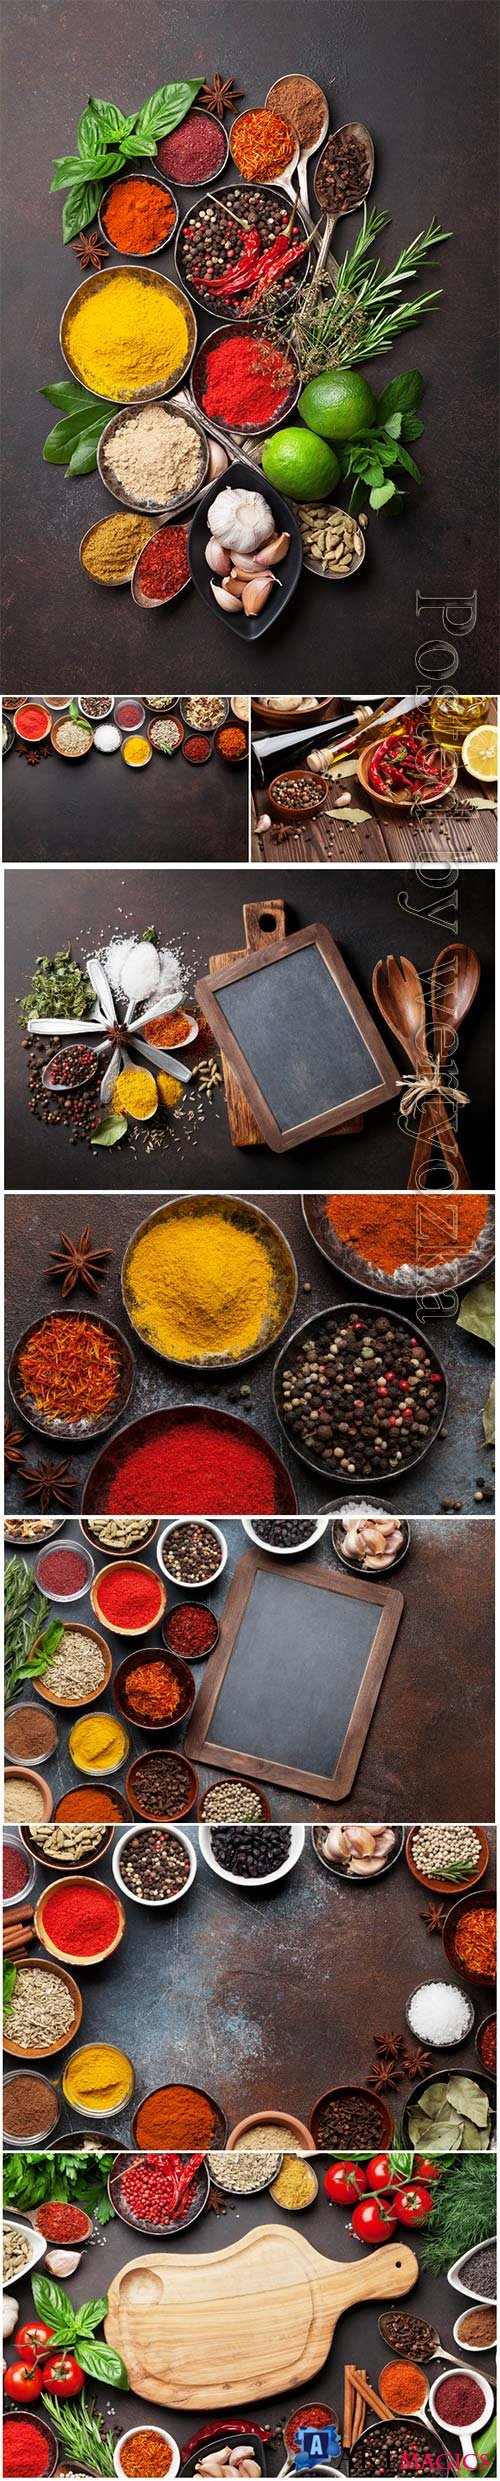 Various spices and herbs beautiful stock photo